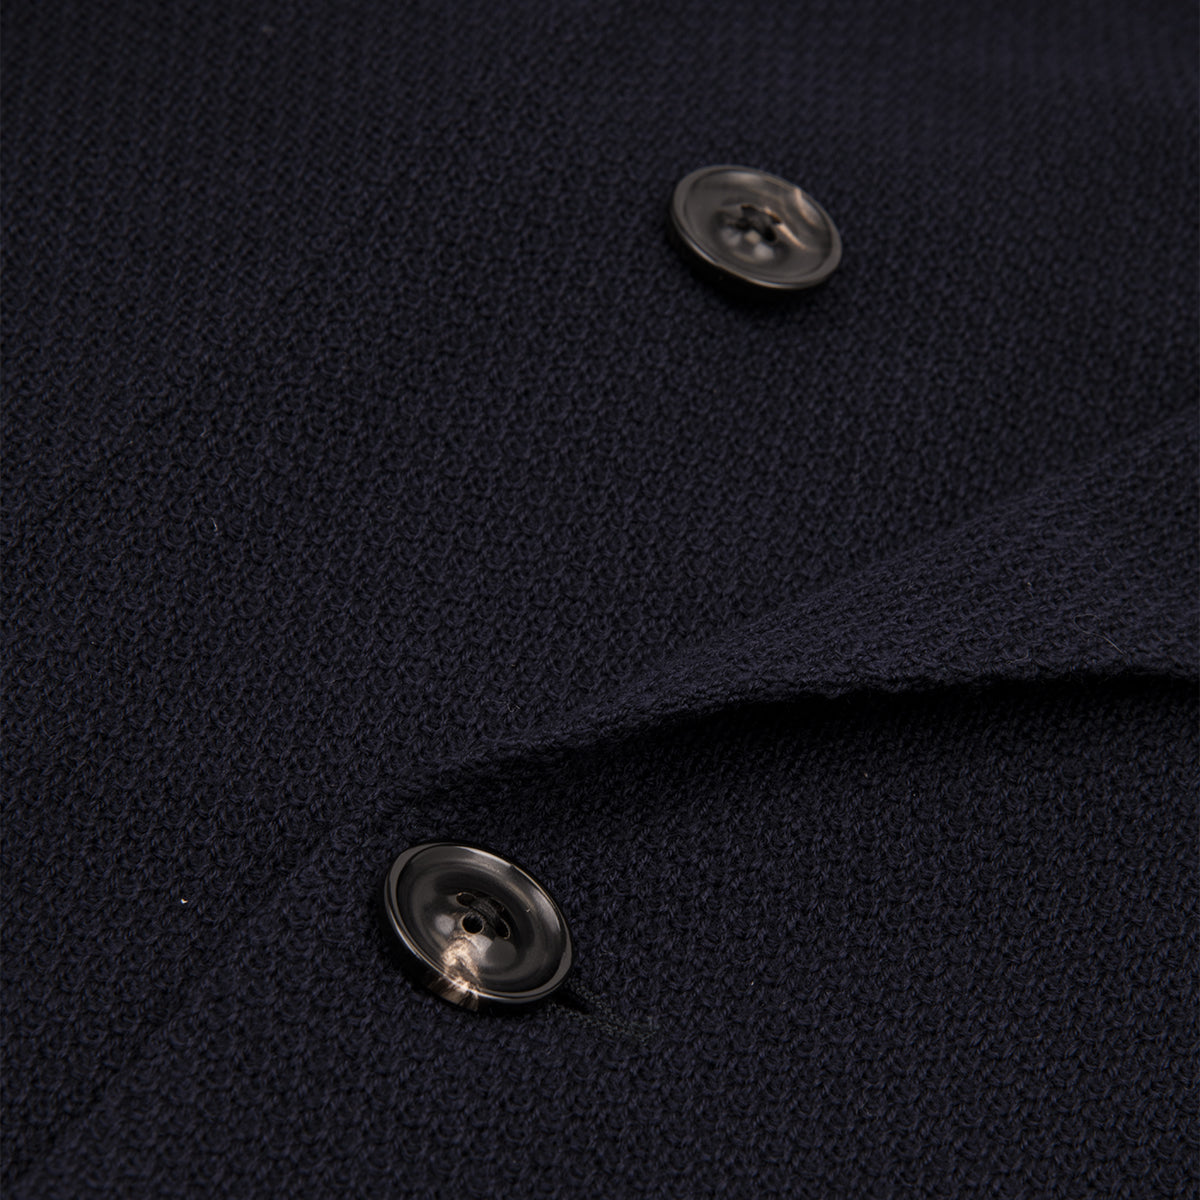 Linkknit Double Breasted Jacket - Navy